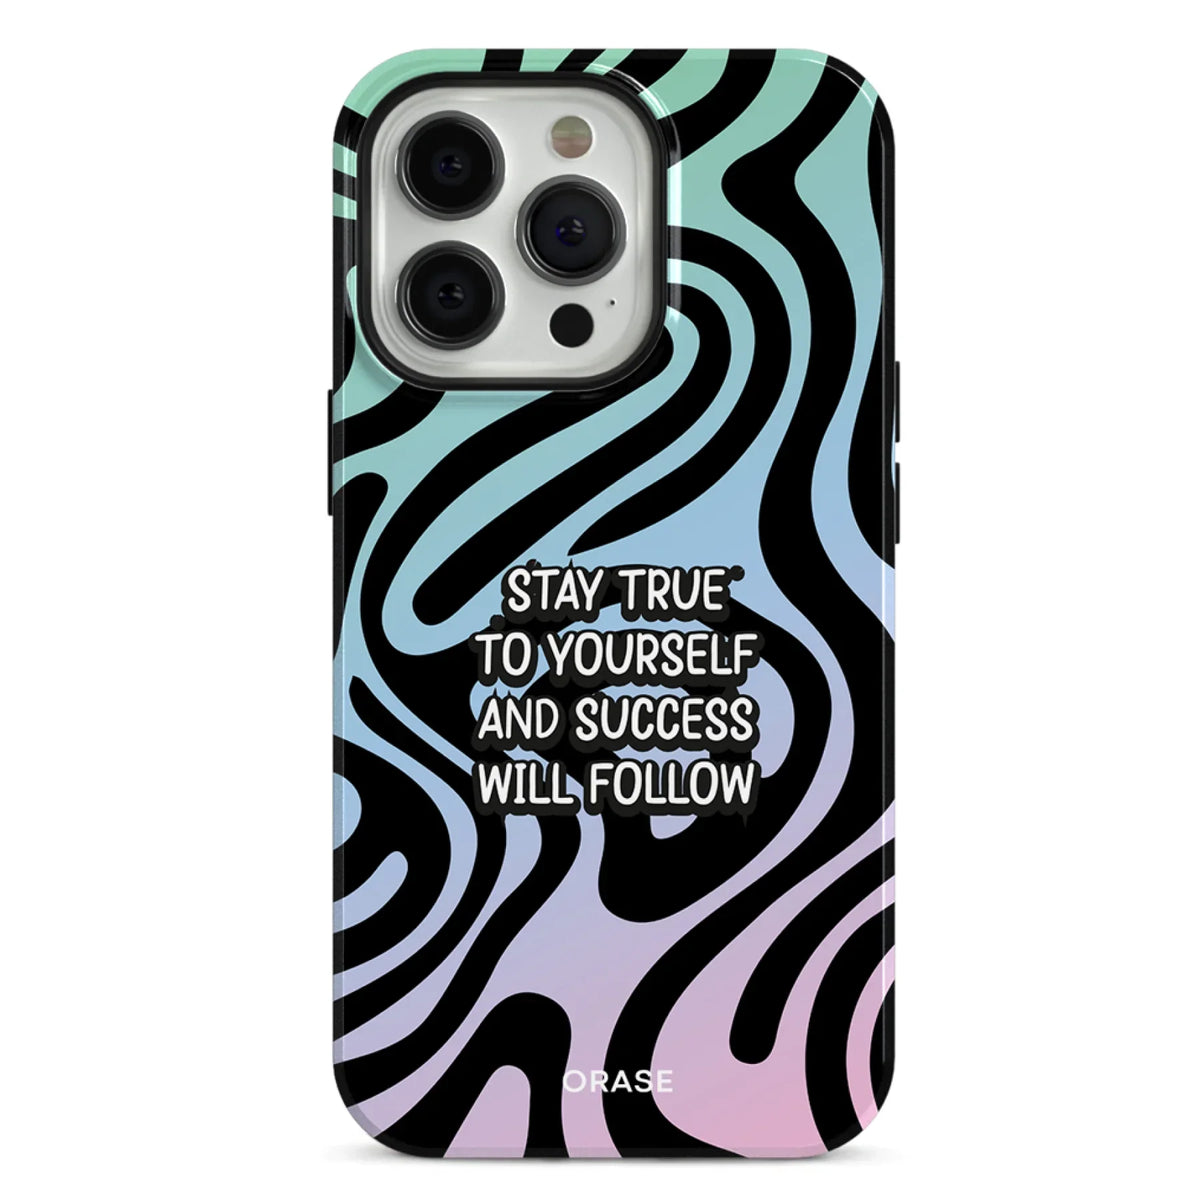 Stay True to Yourself iPhone Case - iPhone 12 Pro